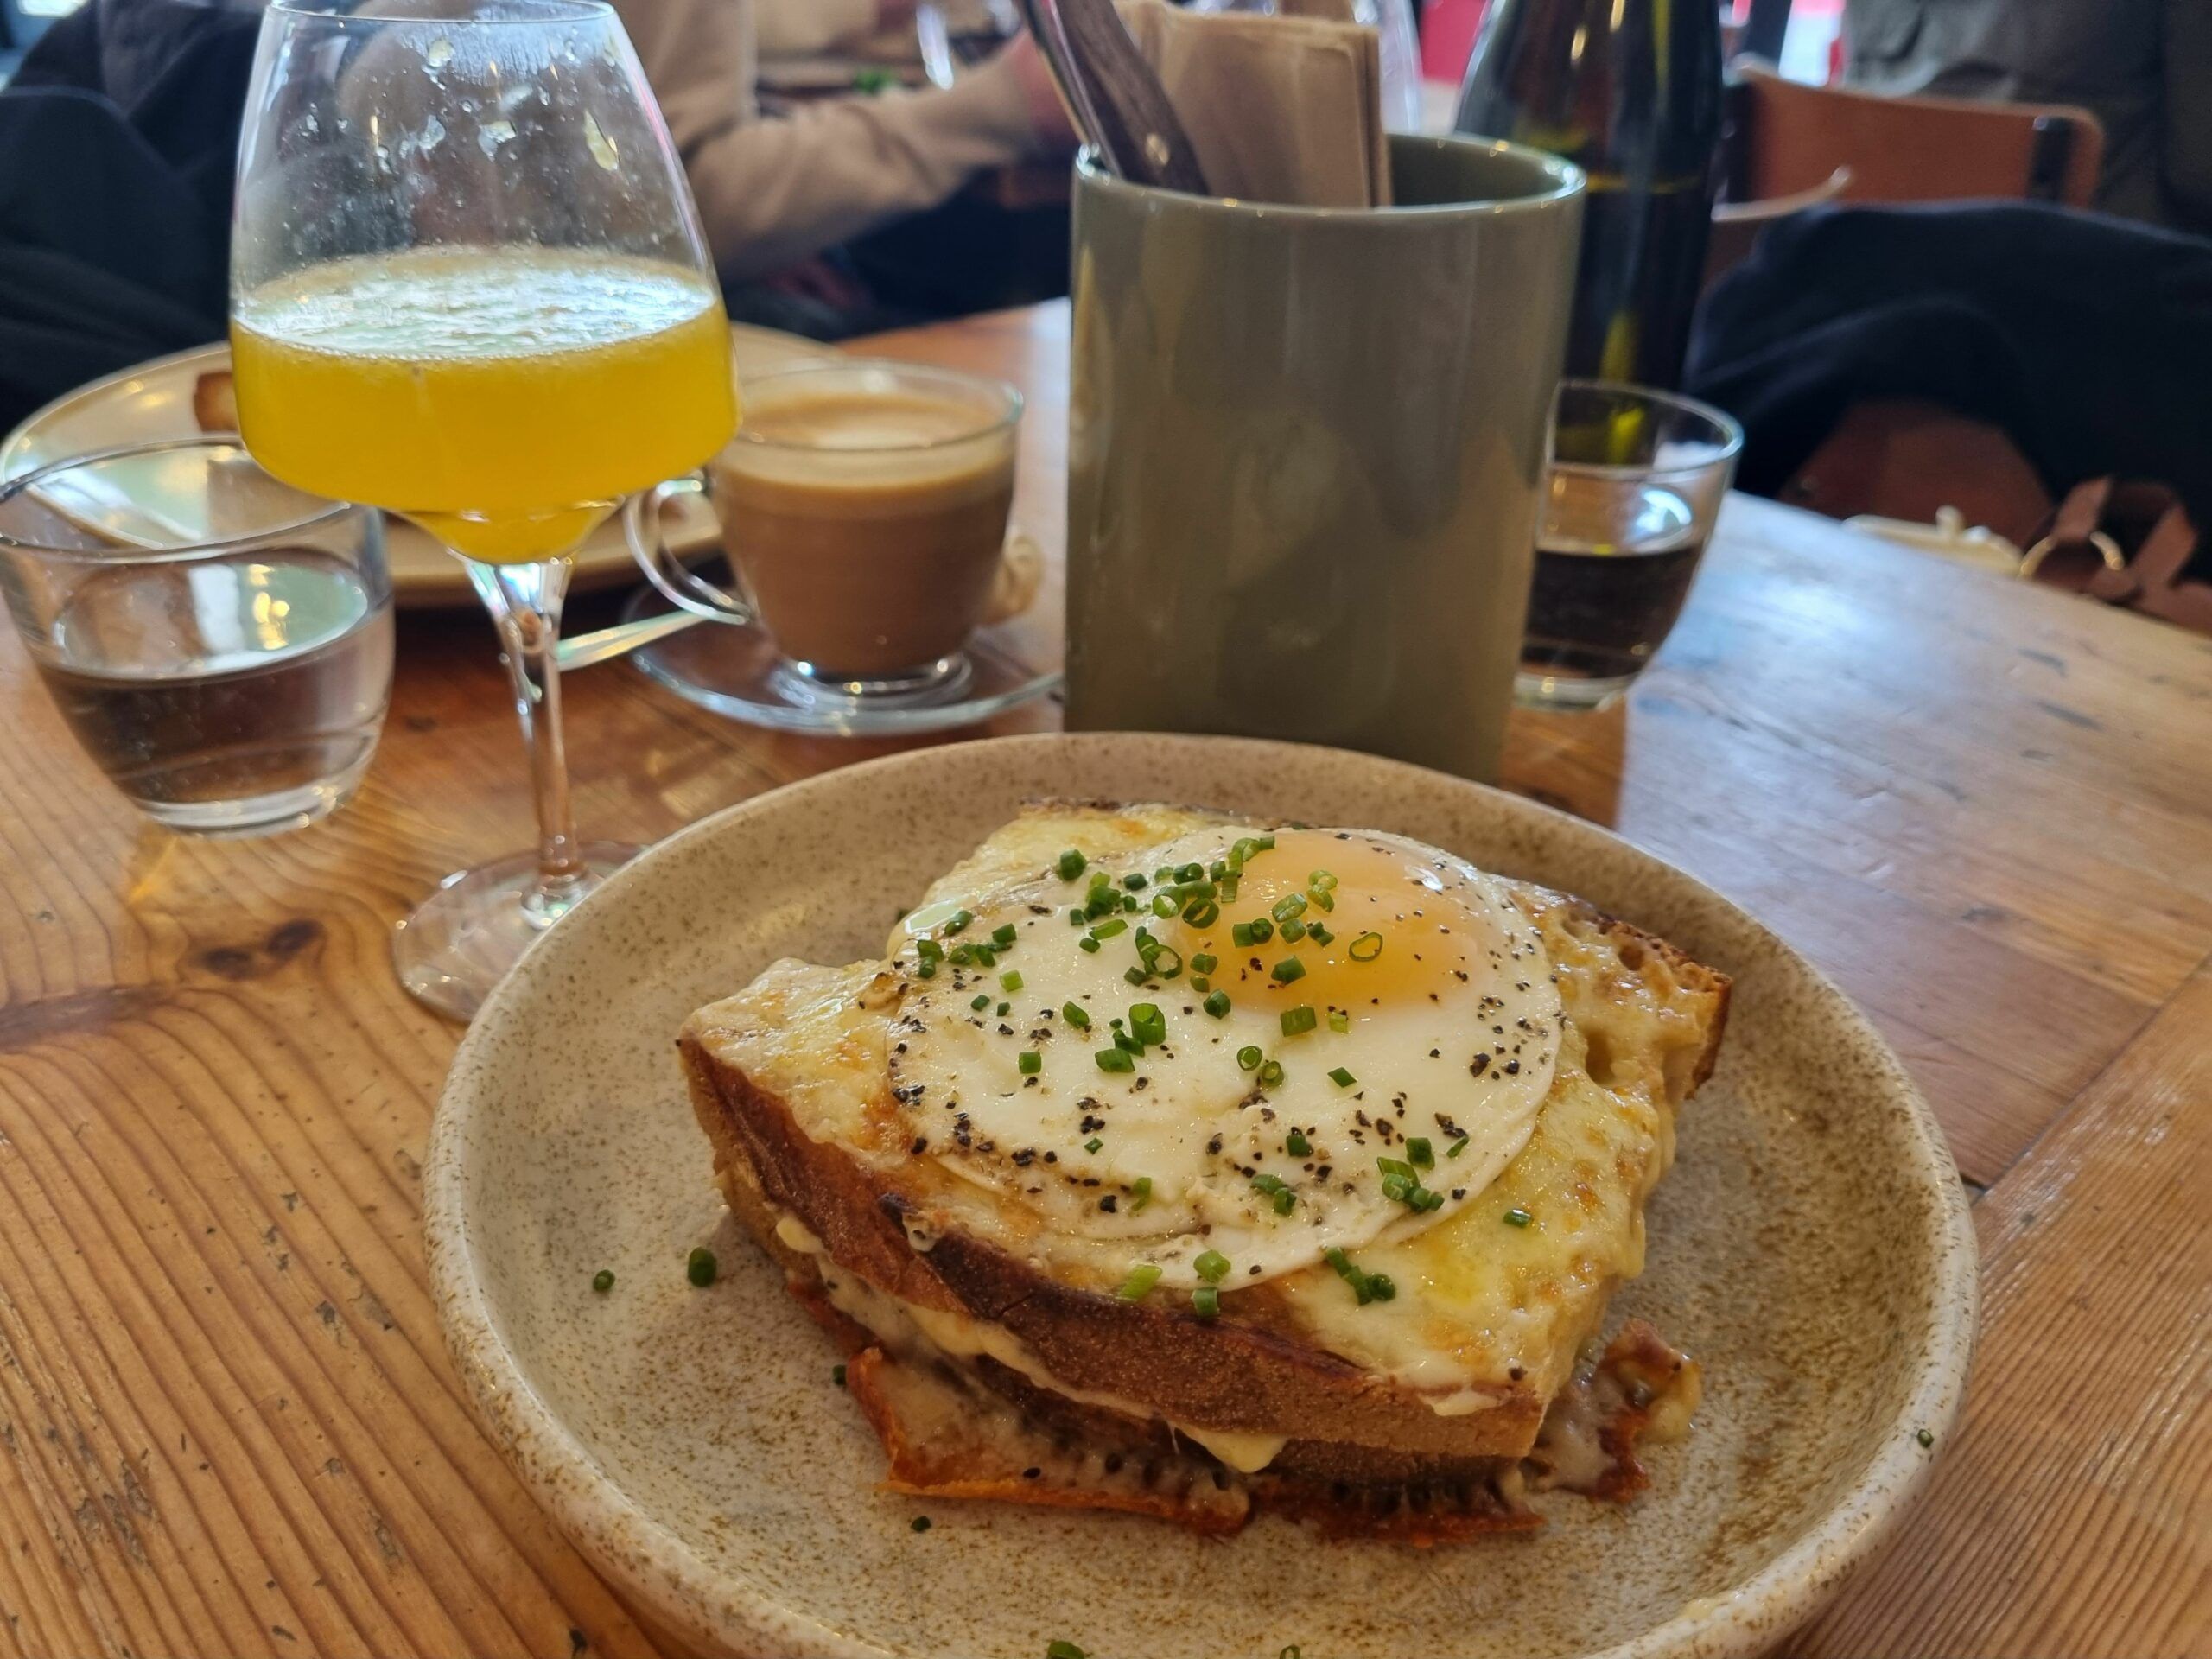 French “Le grand” croque monsieur served on grey plate on the wooden table and with mimosa